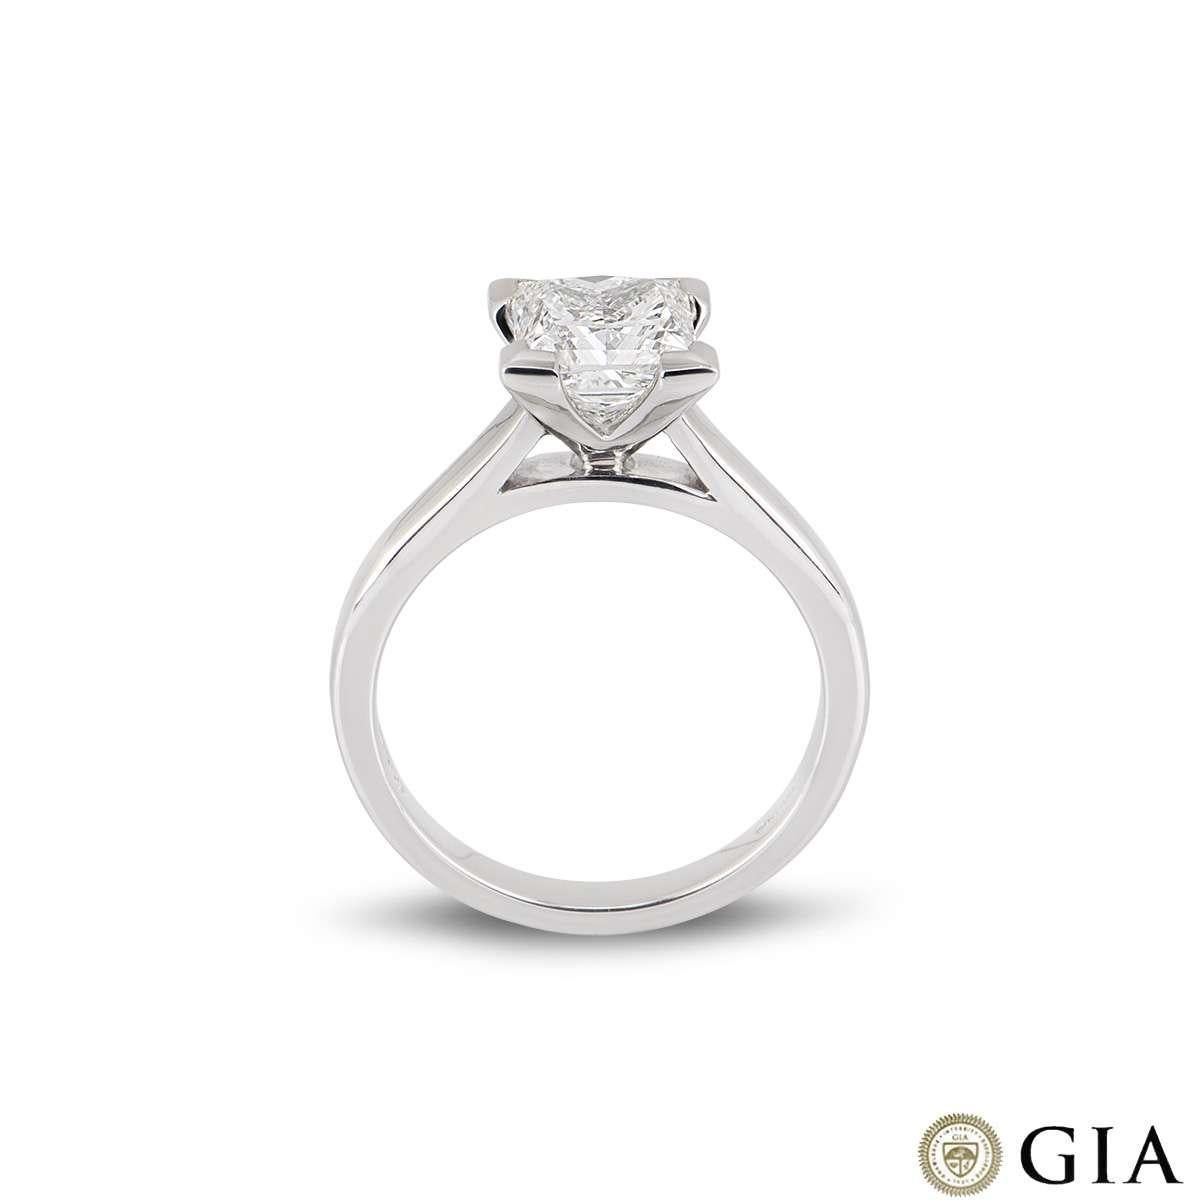 An outstanding single stone princess cut diamond ring set in 18k white gold. The princess cut diamond weighs 2.01ct, is G colour and VS1 clarity. The diamond is set within a contemporary four claw setting on a 2.5mm band. The ring is currently a US